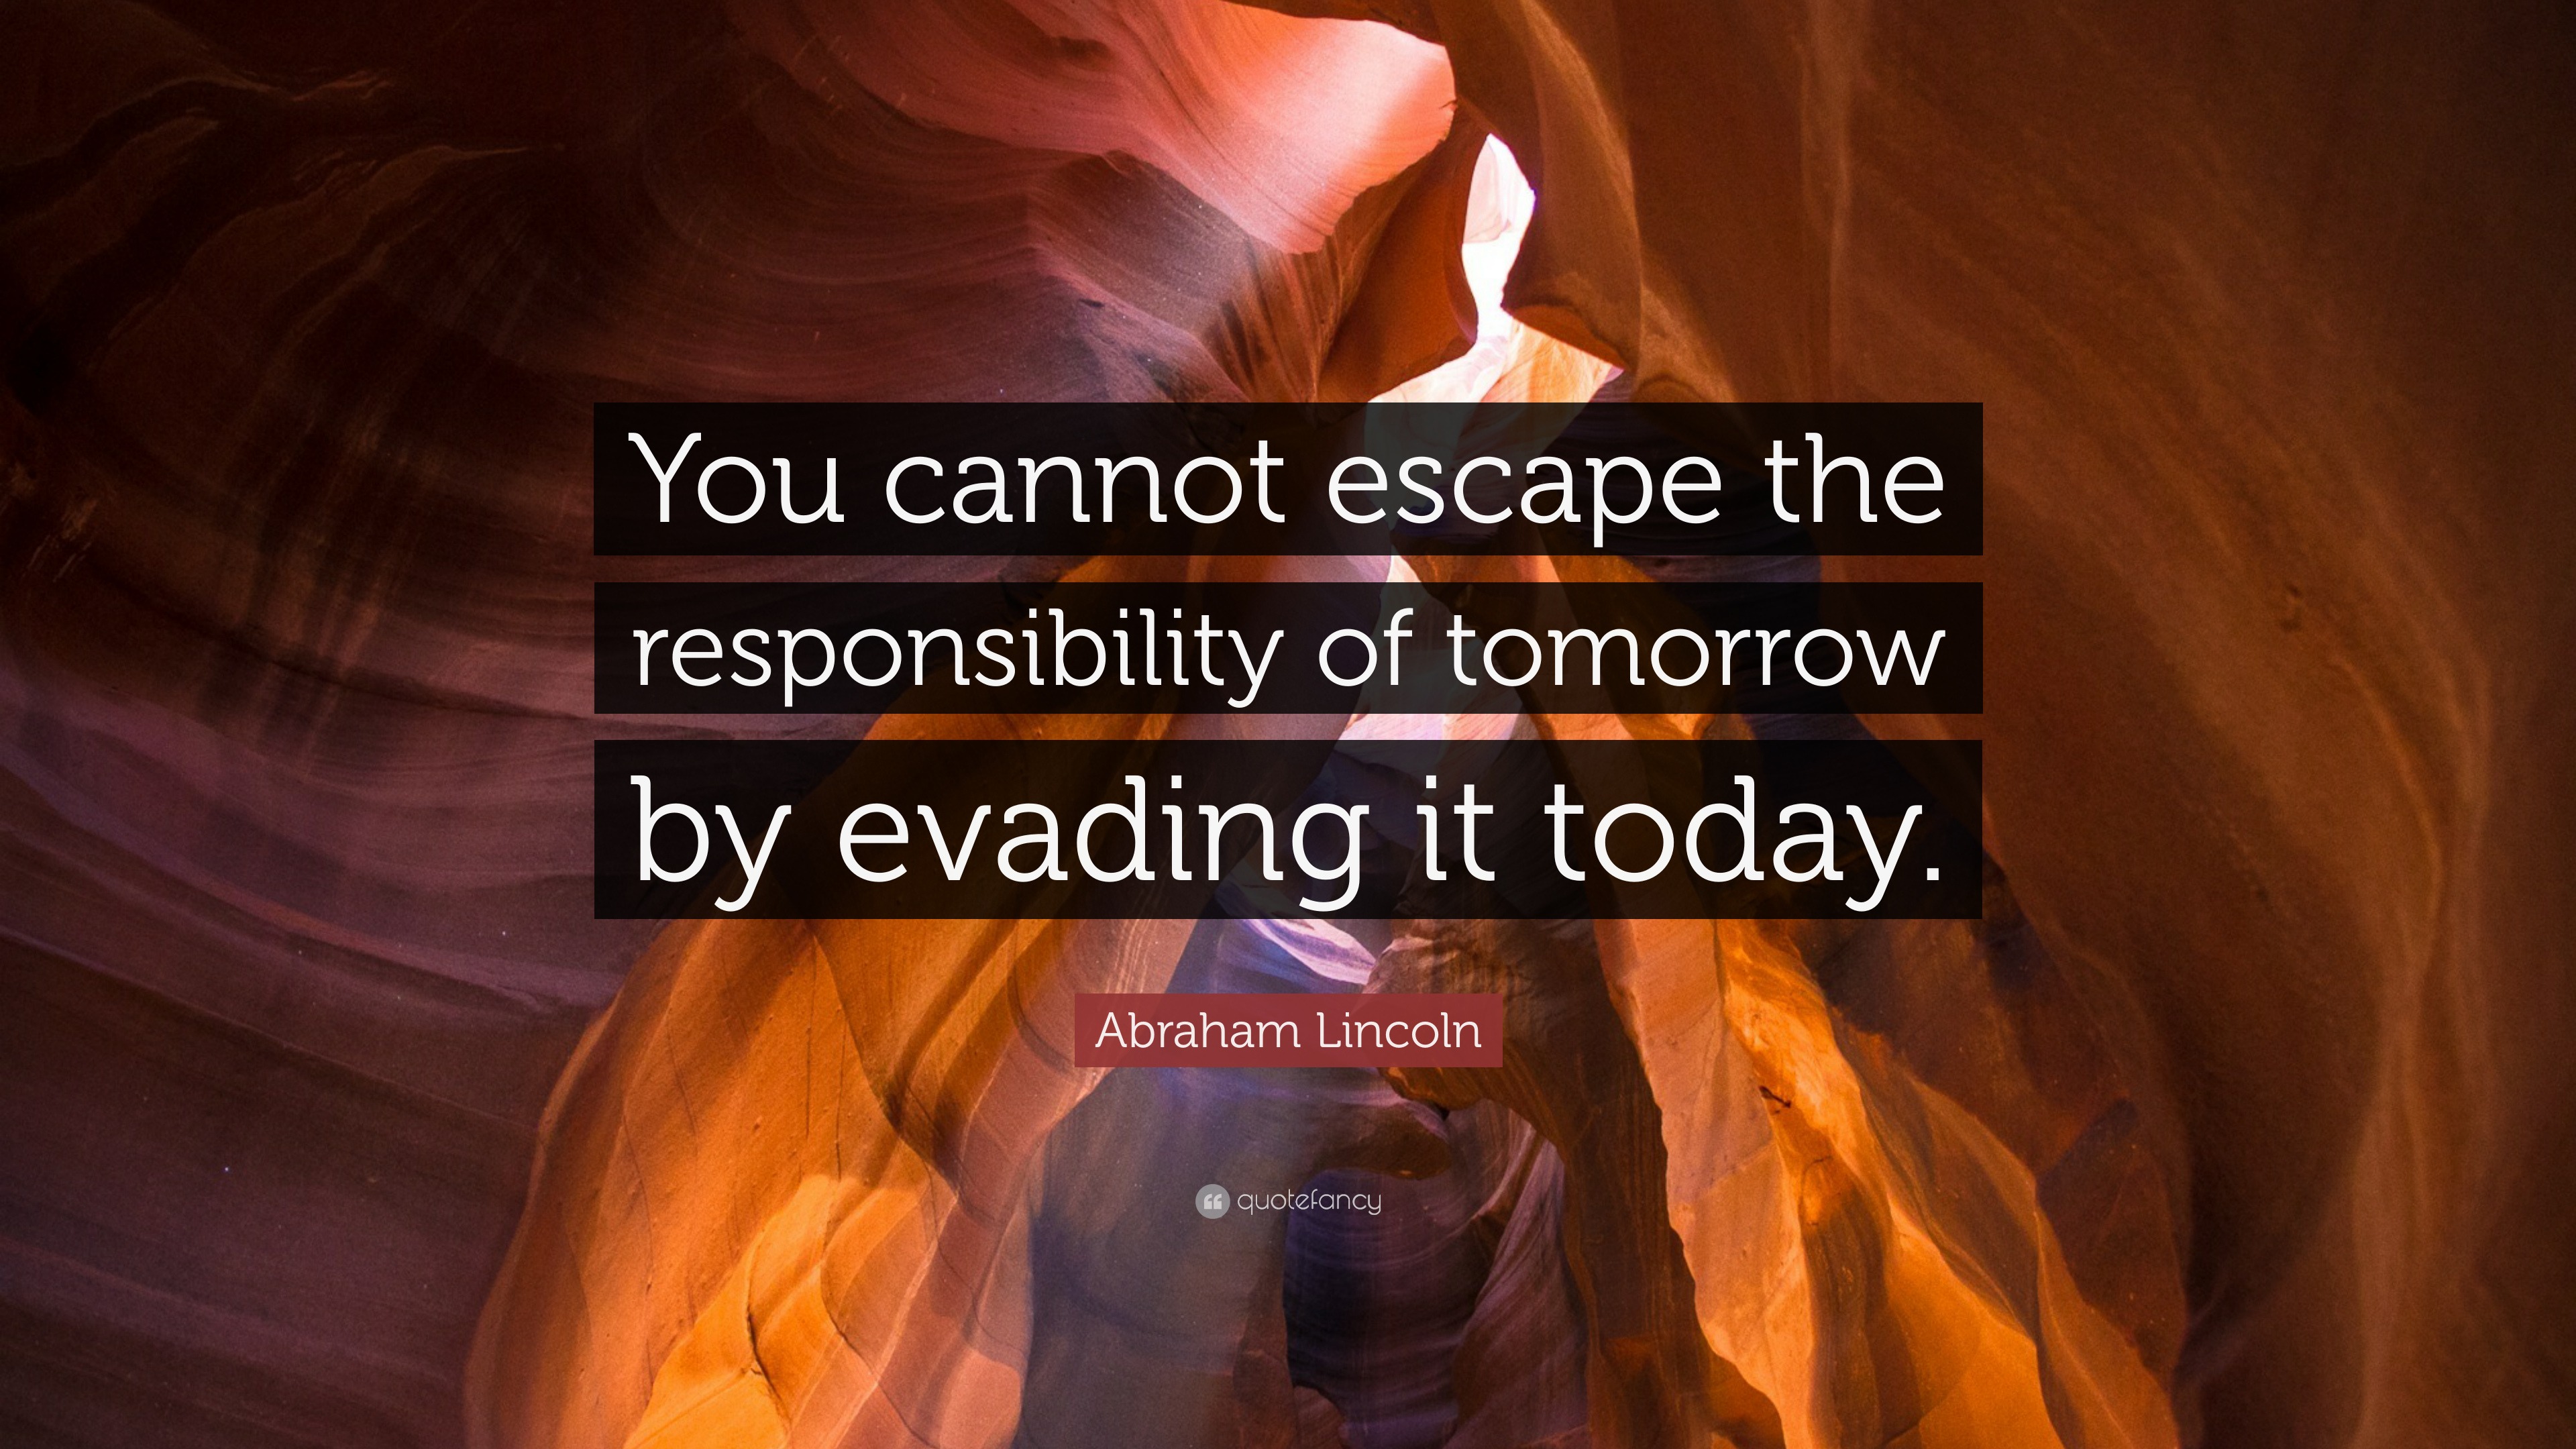 Abraham Lincoln - You cannot escape the responsibility of